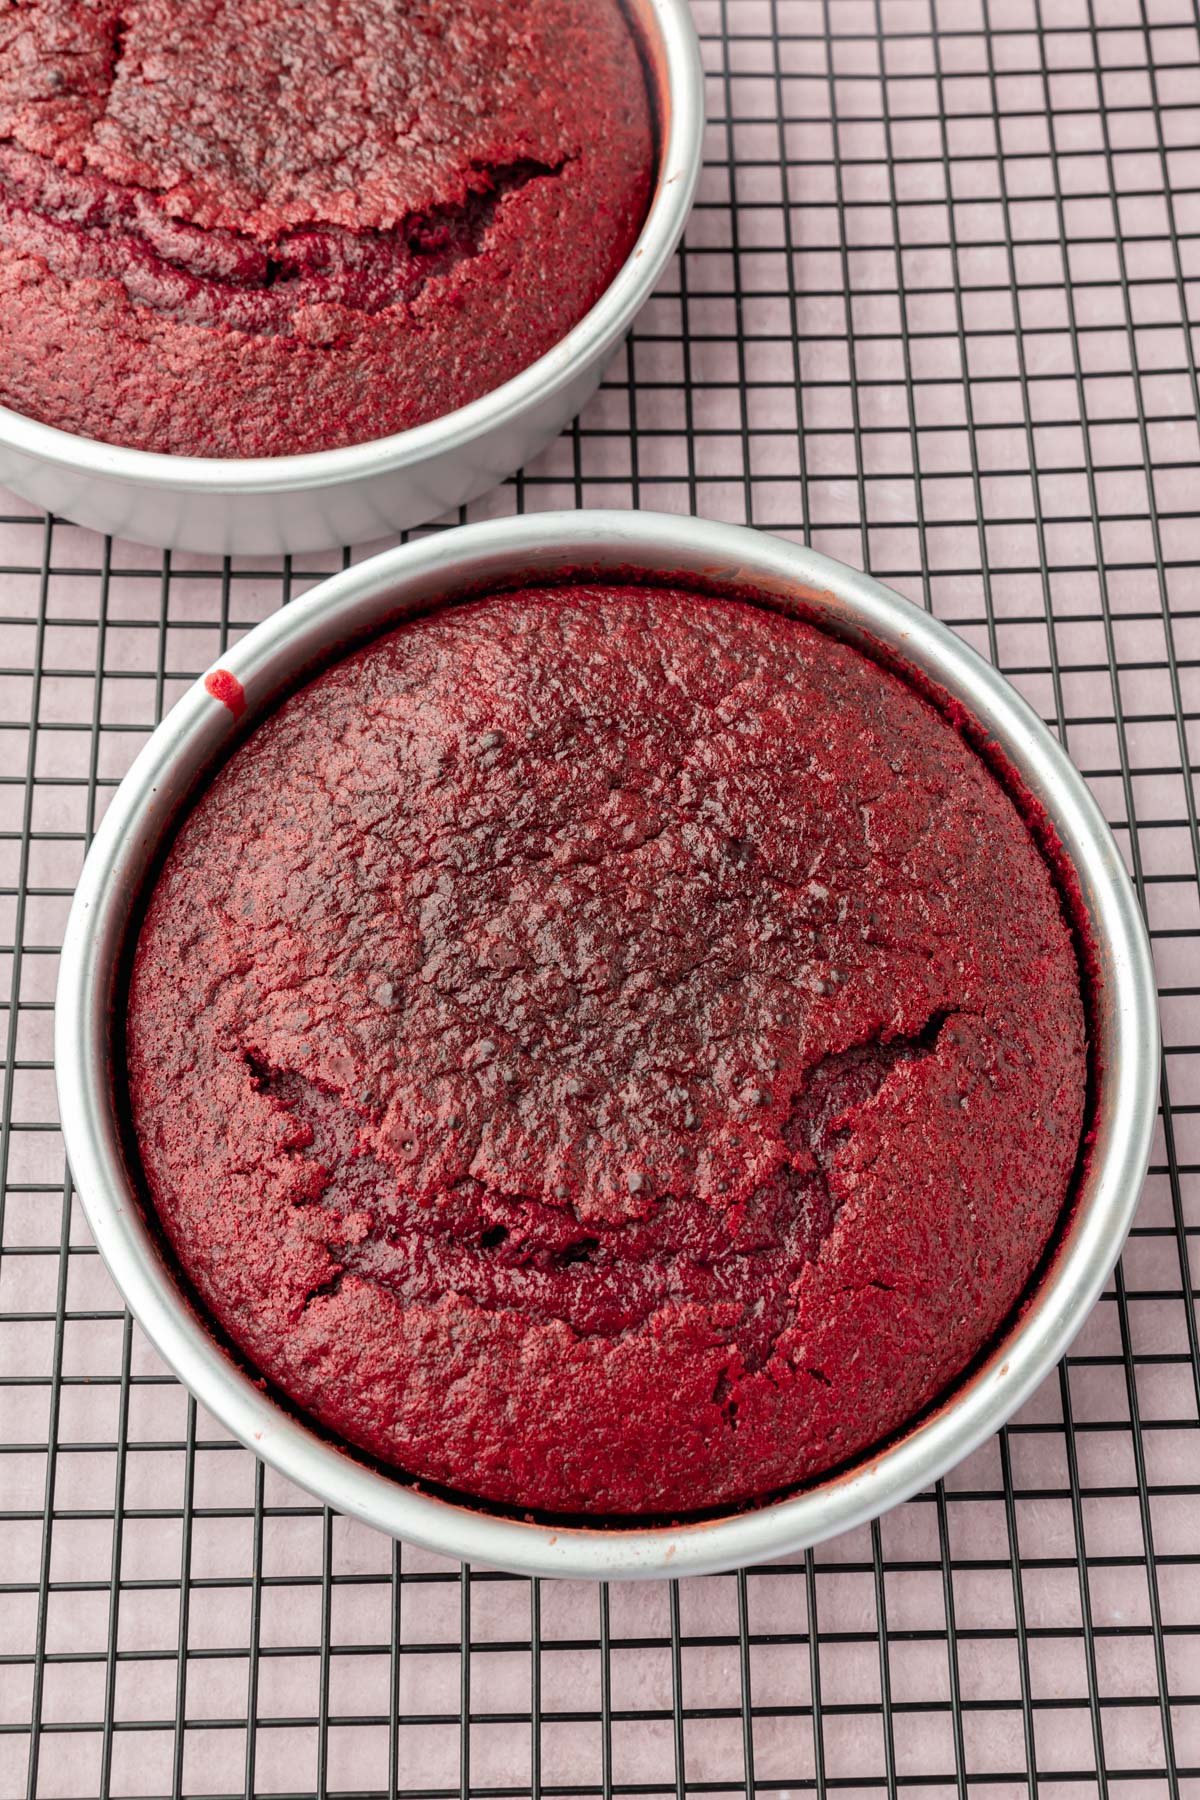 Two red velvet cakes in their pans on a wire cooling rack.